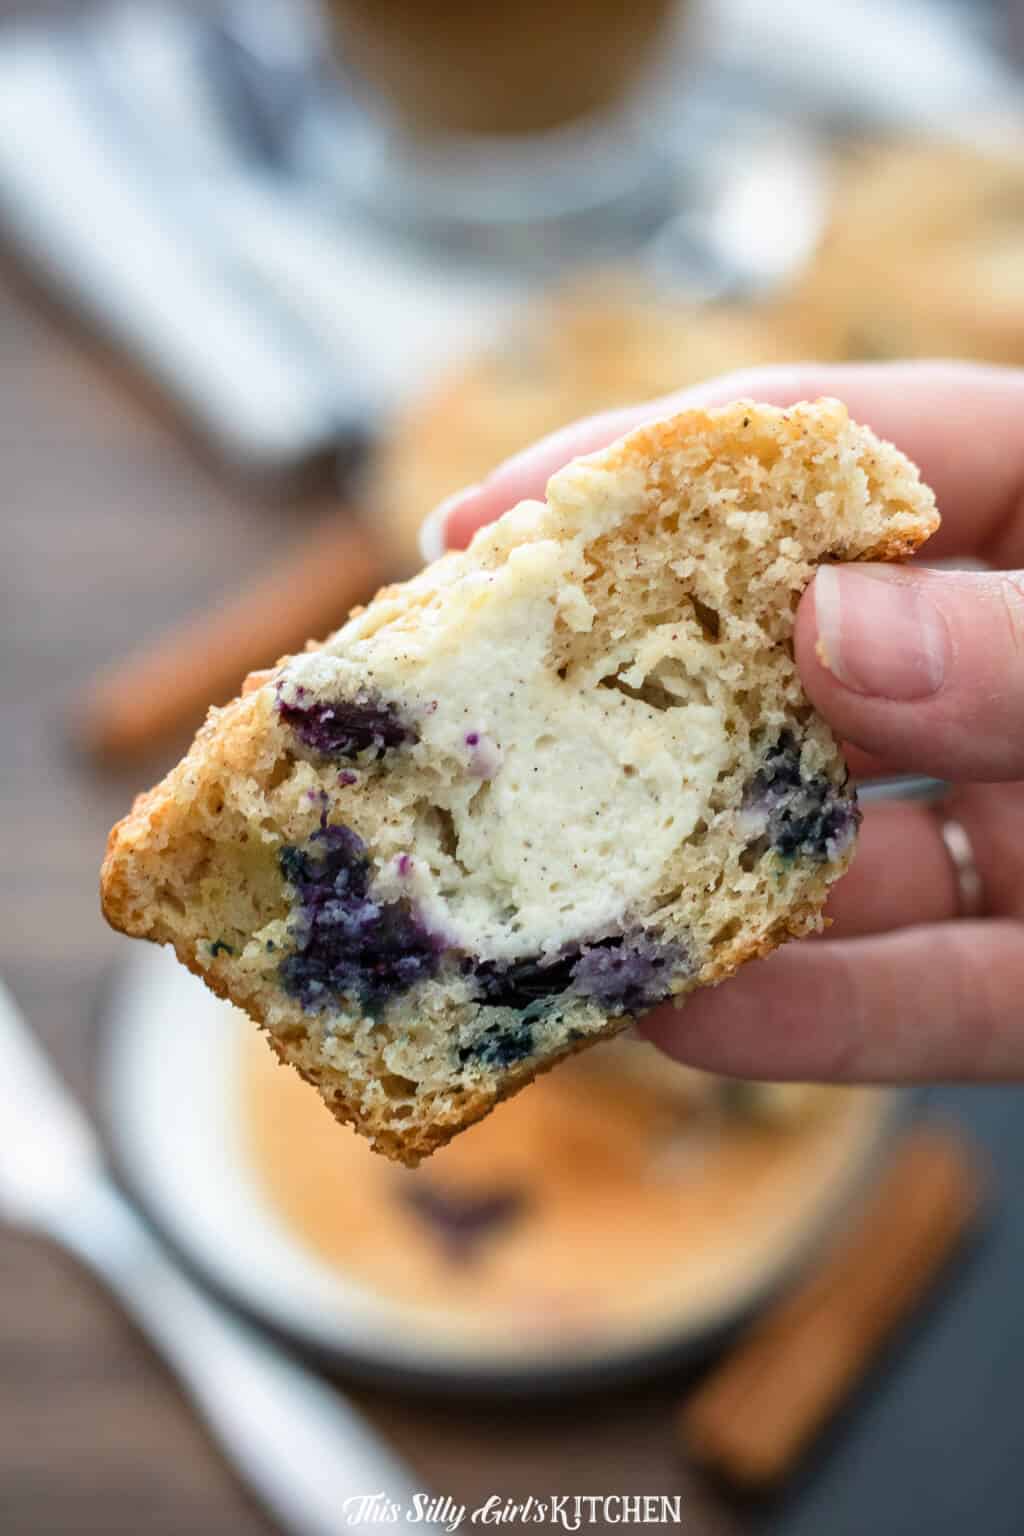 Hand holding up half of a Best Blueberry Muffin showing cream cheese filling.